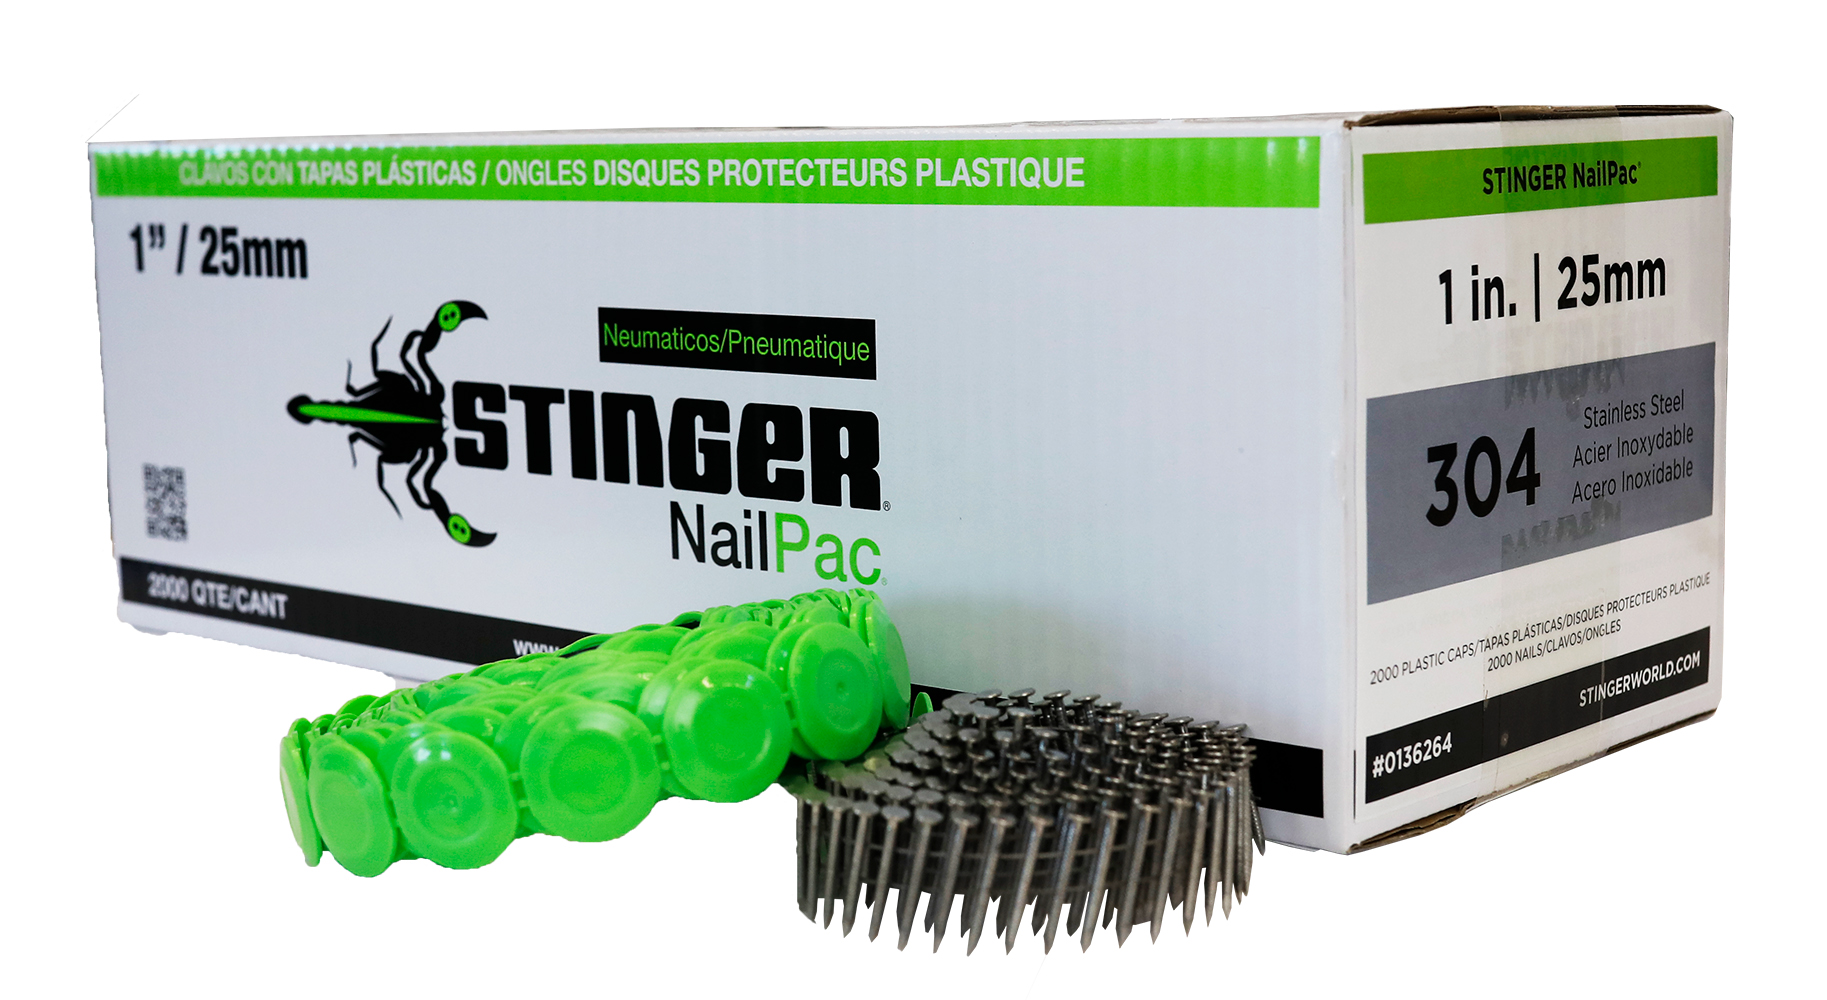 National Nail's STINGER® NailPac® has been approved by the IBHS FORTIFIED Home™ Program for strengthening residential buildings beyond standard building codes.